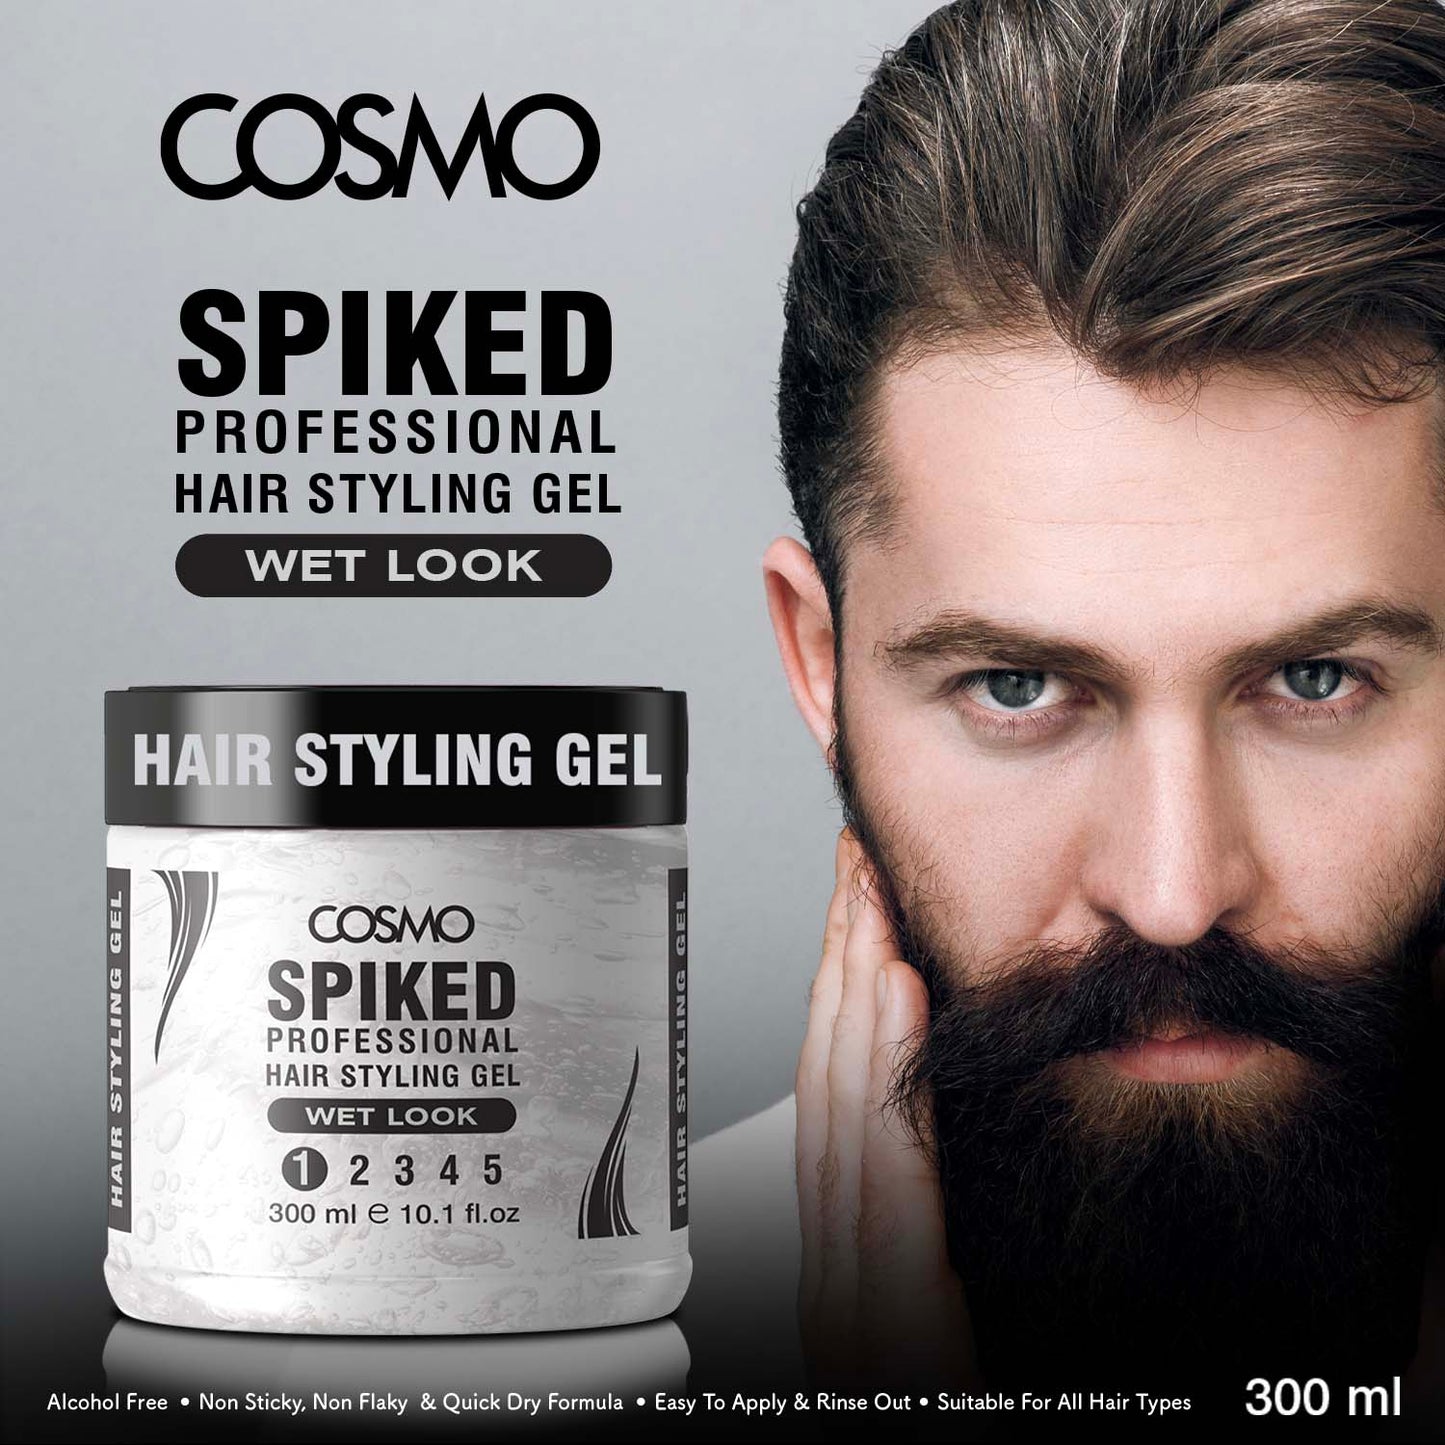 SPIKED PROFESSIONAL HAIR STYLING GEL - WET LOOK